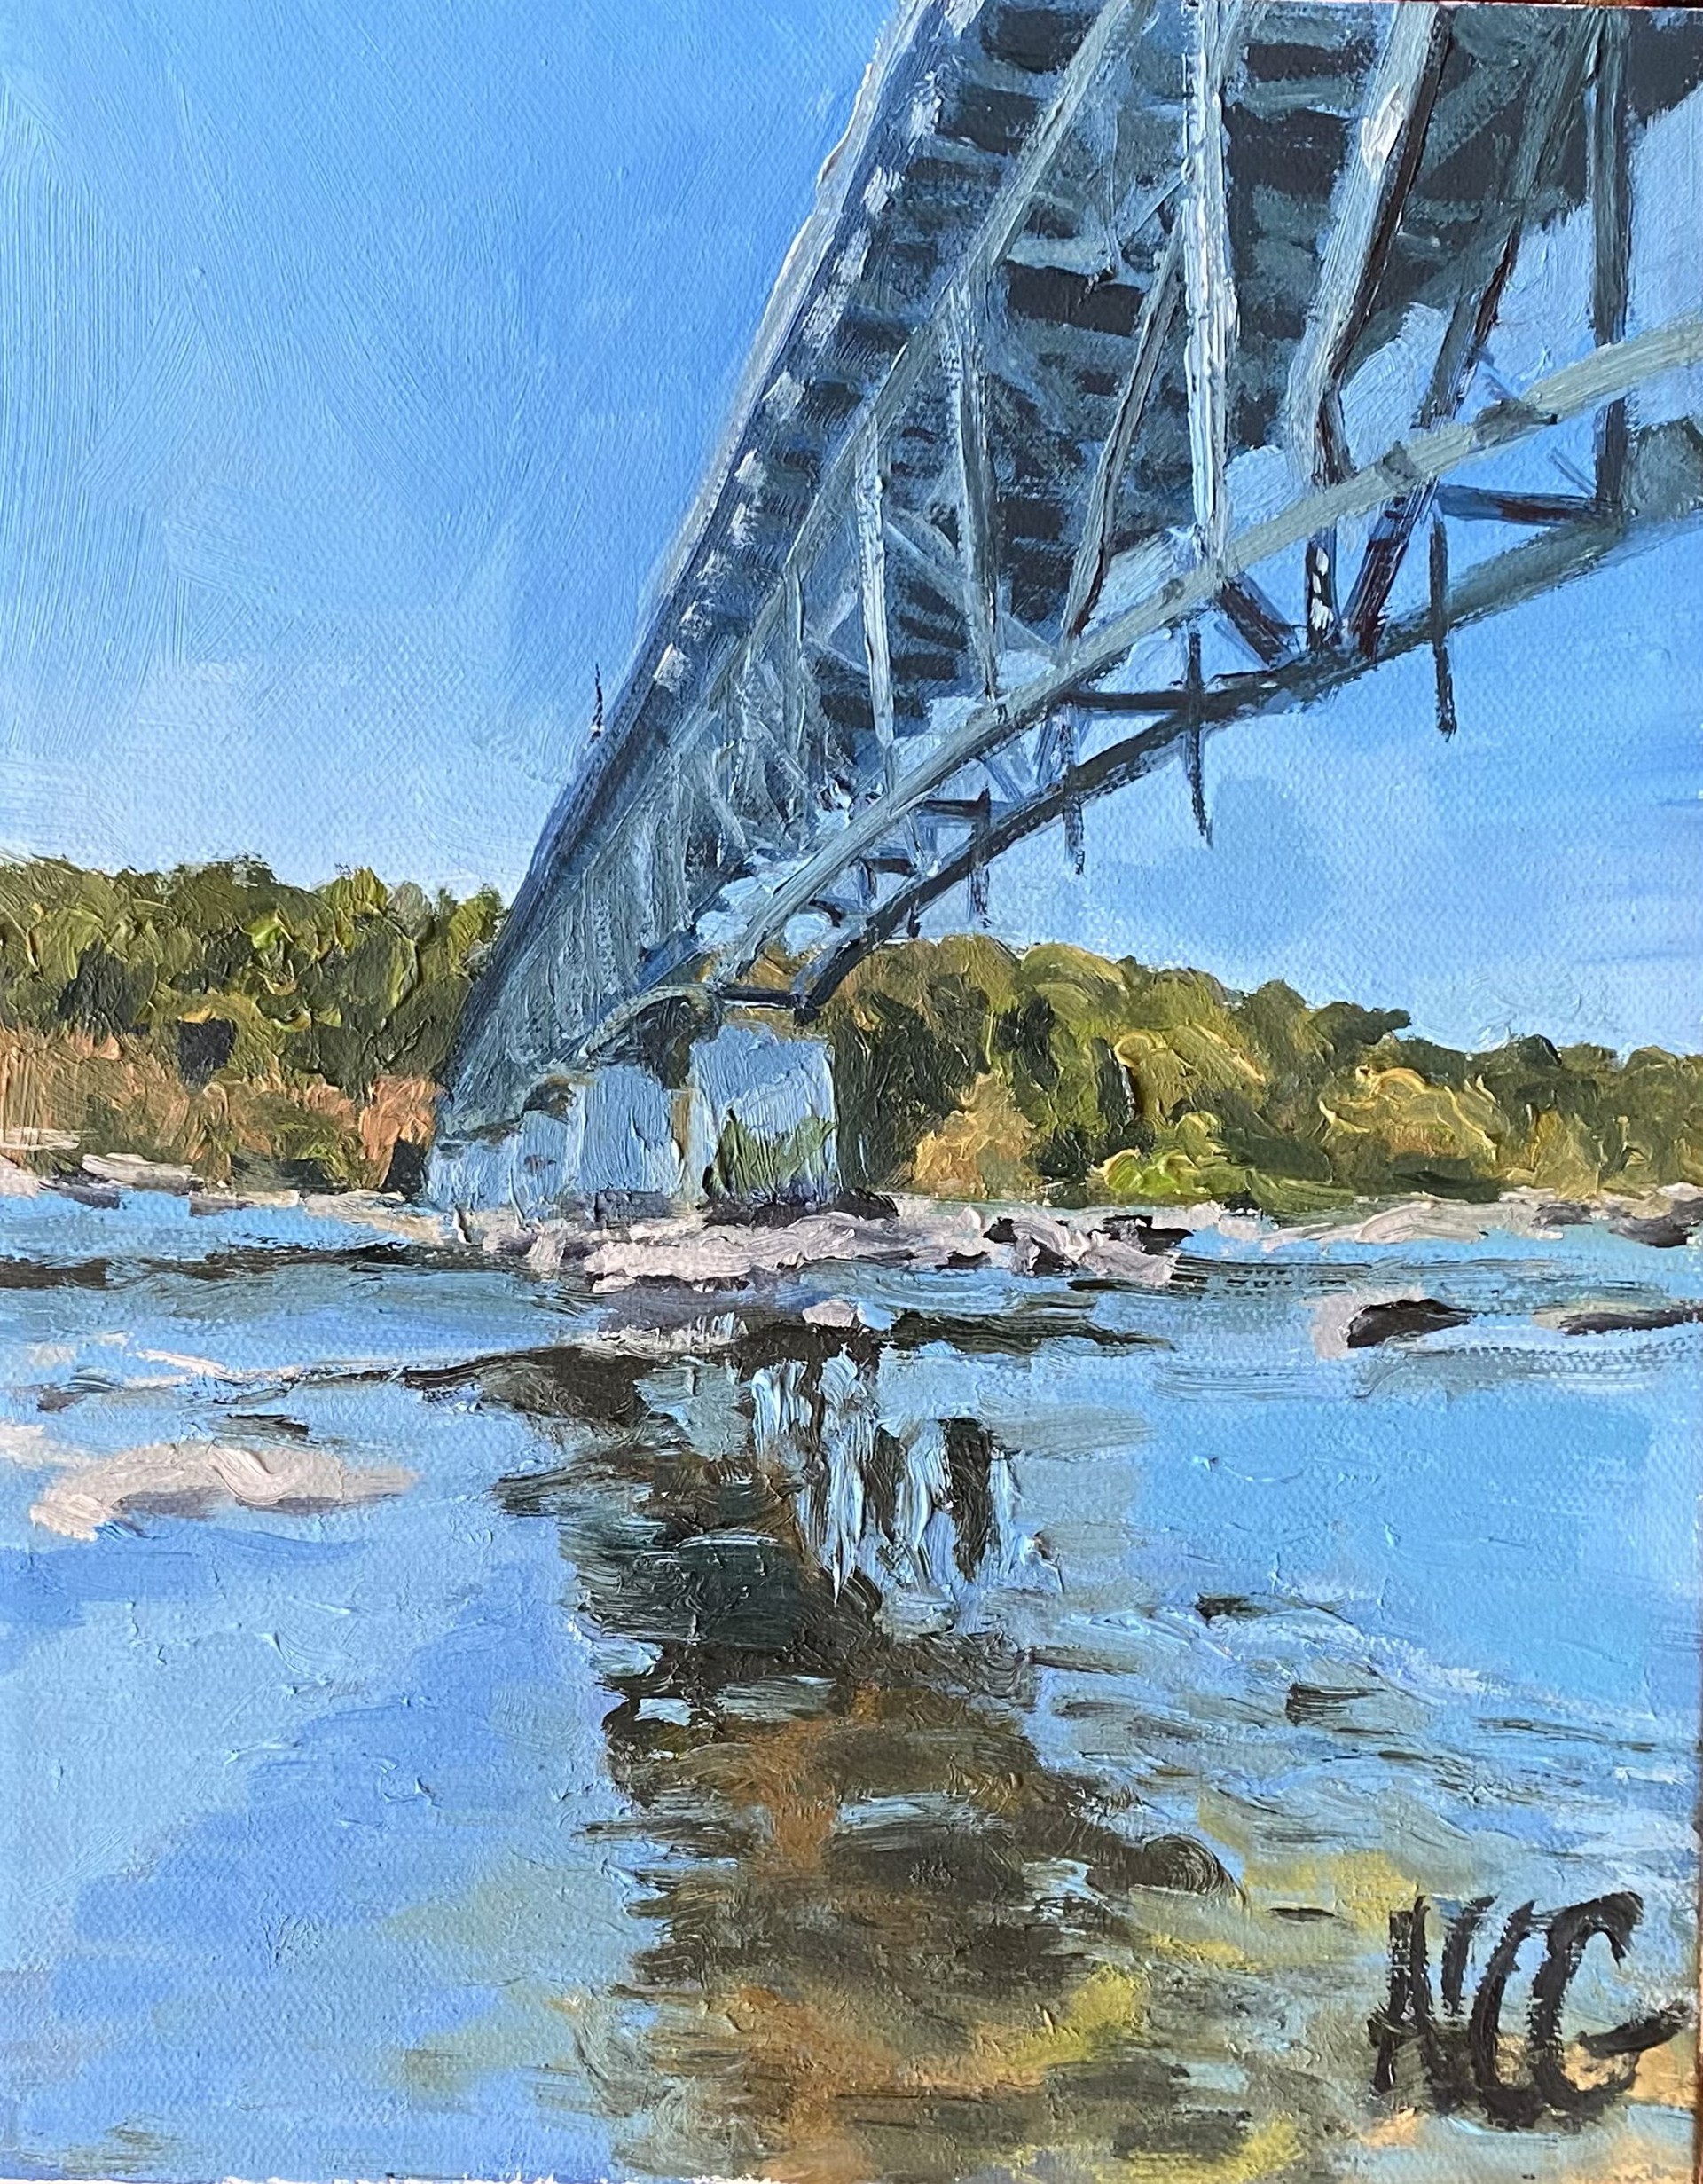 Bridge over the James by Natalie Colleen Gates